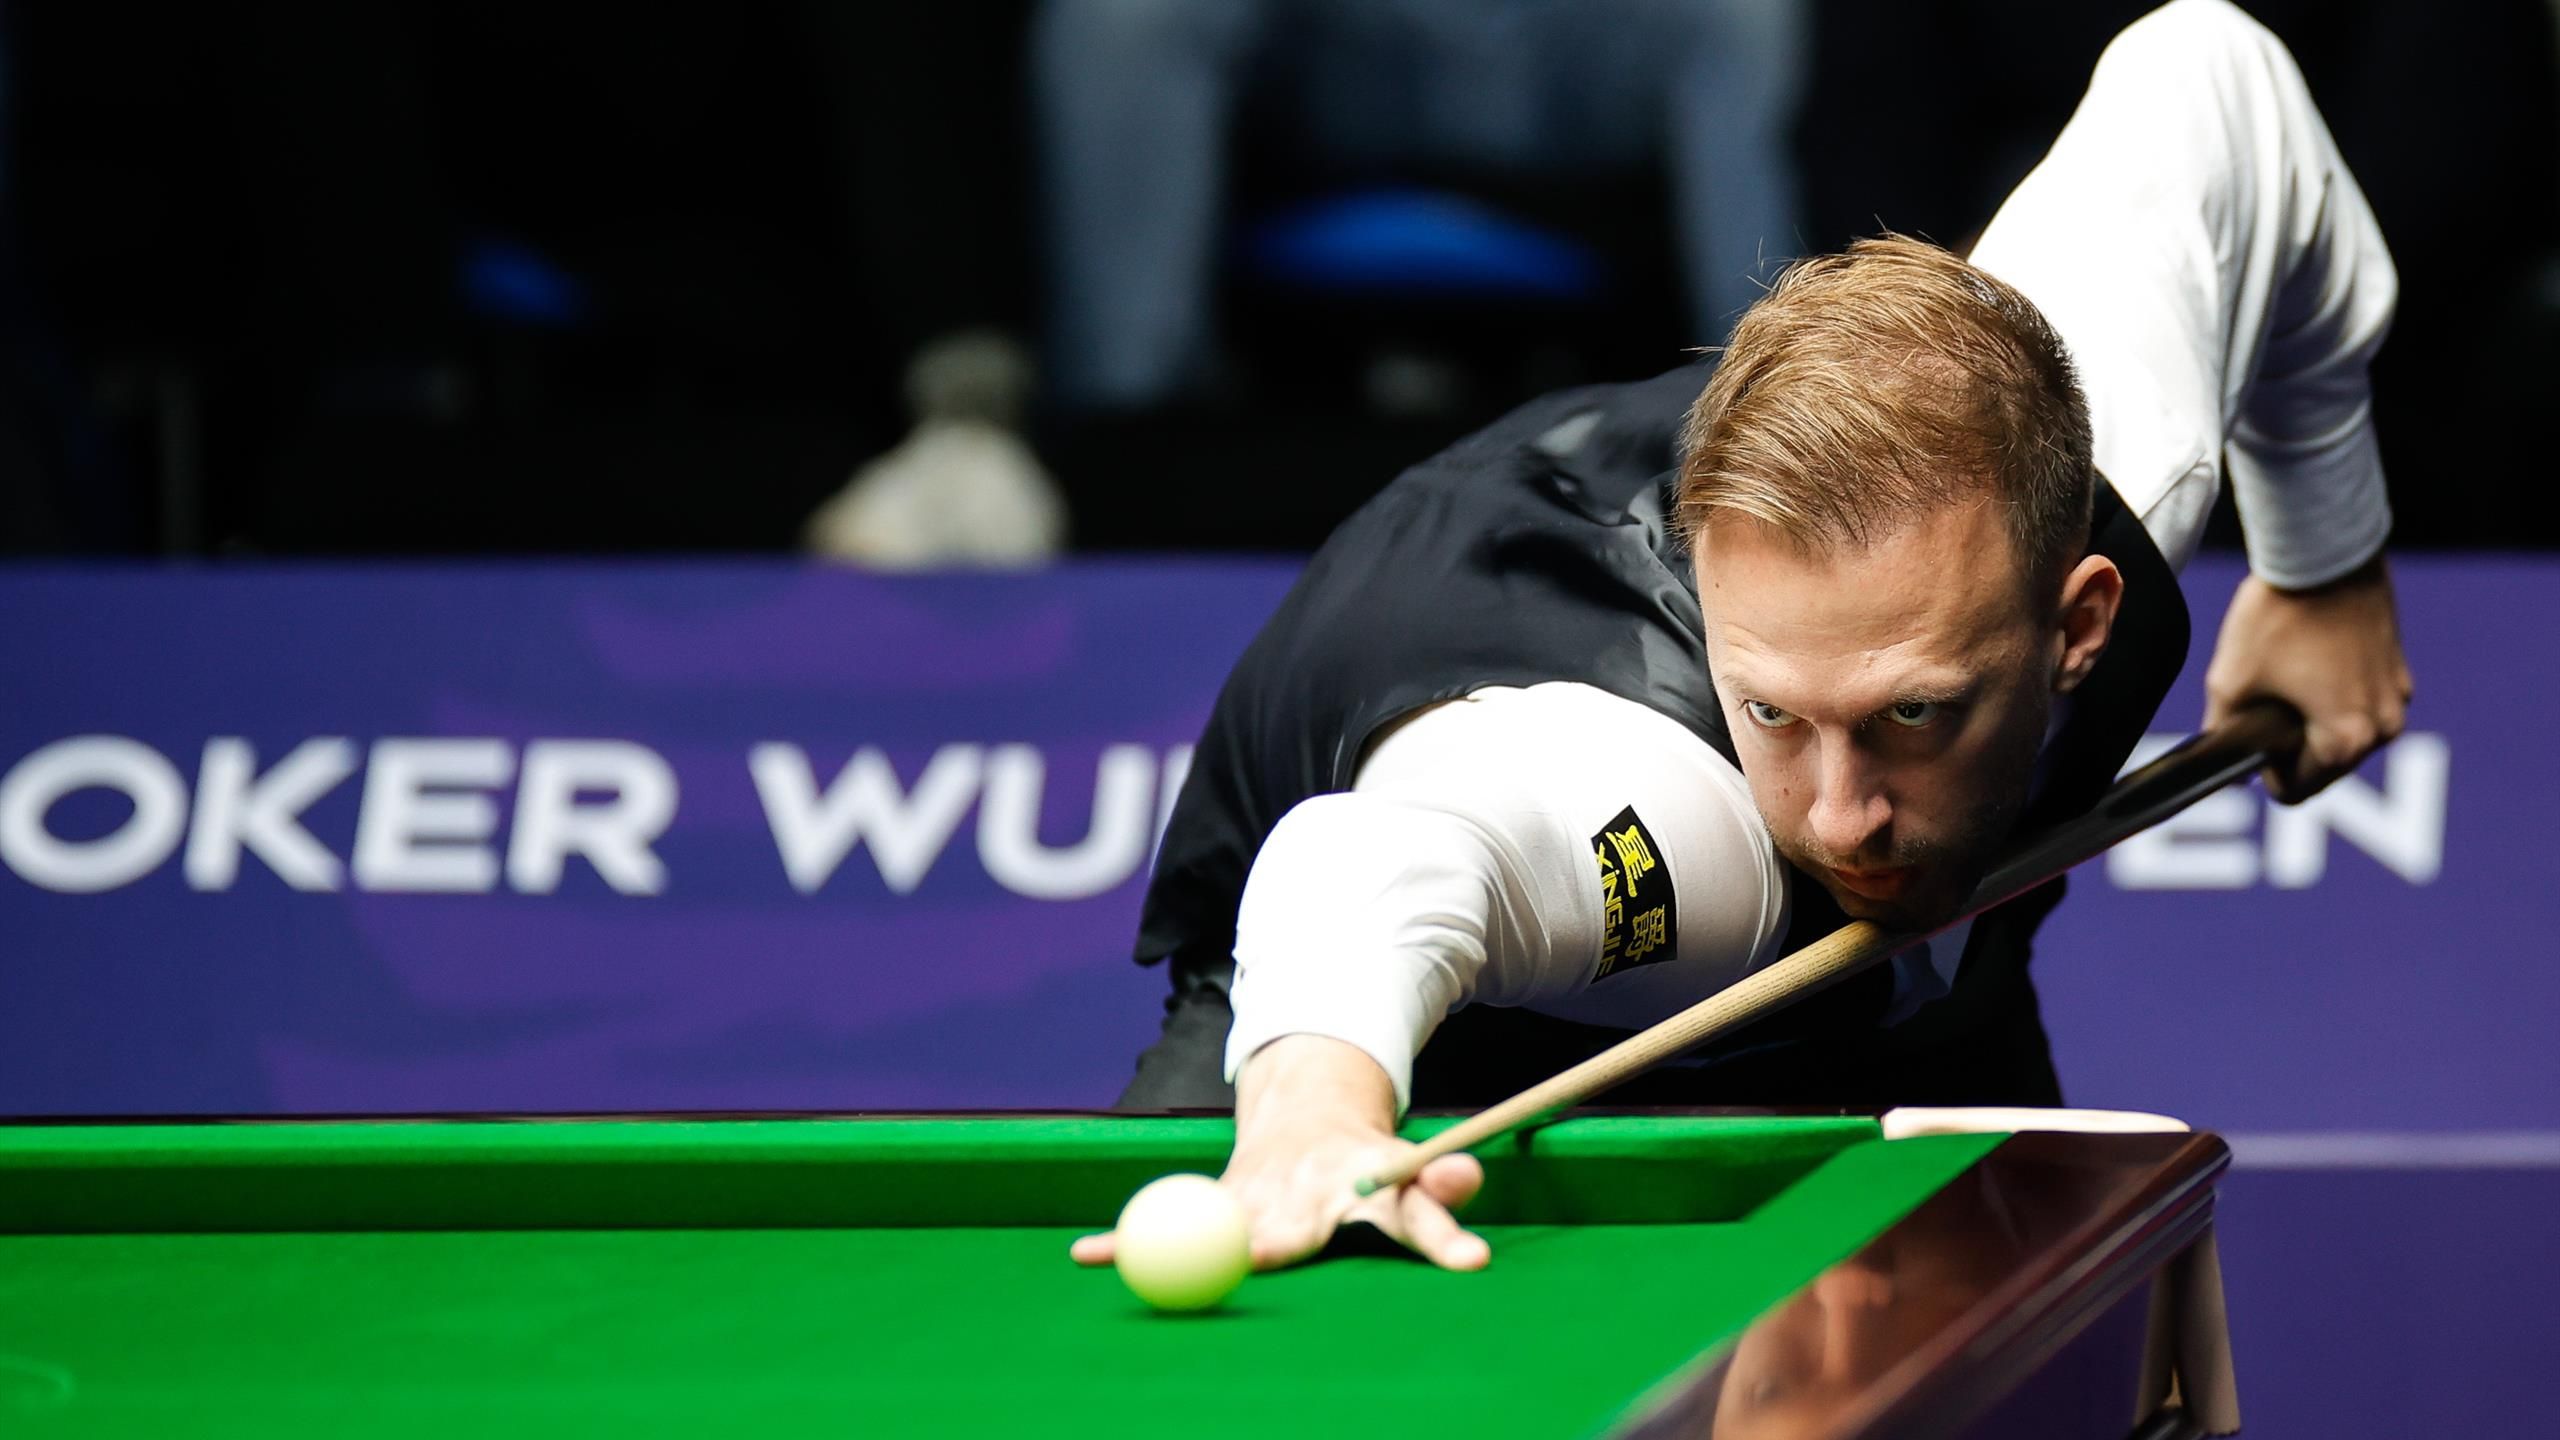 Wuhan Open snooker 2023 - Latest scores, results, schedule, order